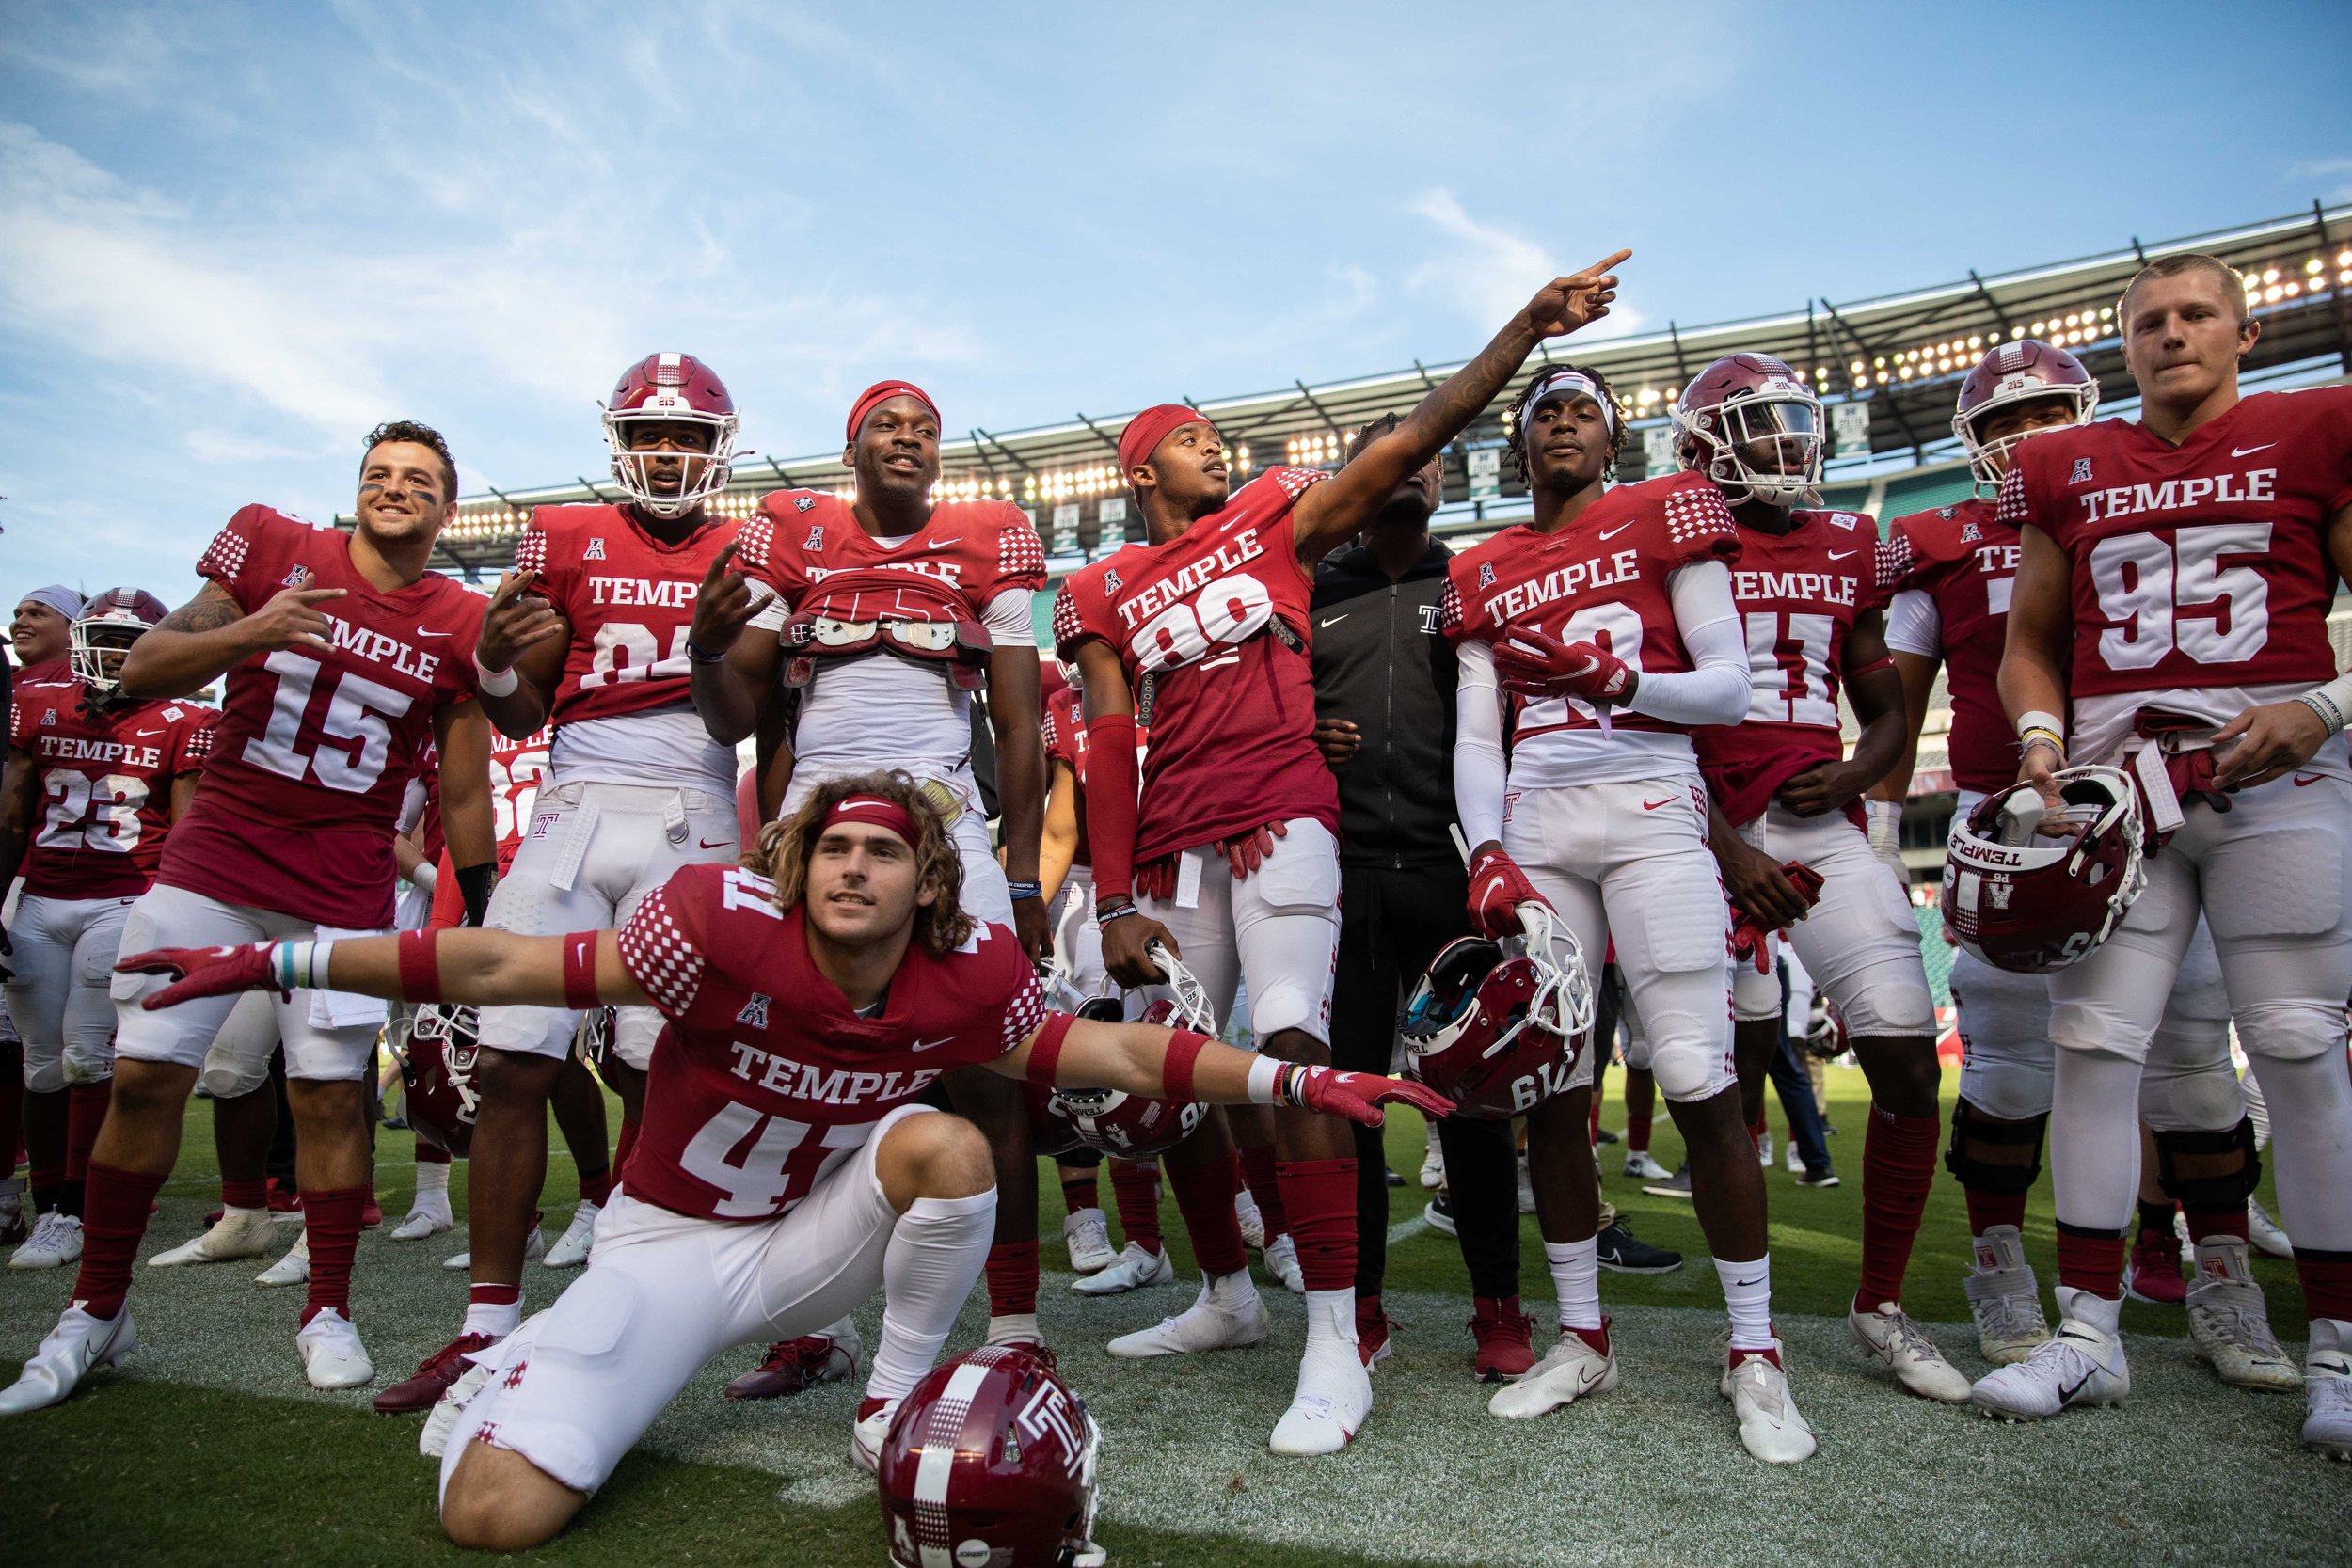   Part of the Temple Owls football team poses for a photo after their win during the homecoming game against the University of Memphis on Oct. 2, 2021.  